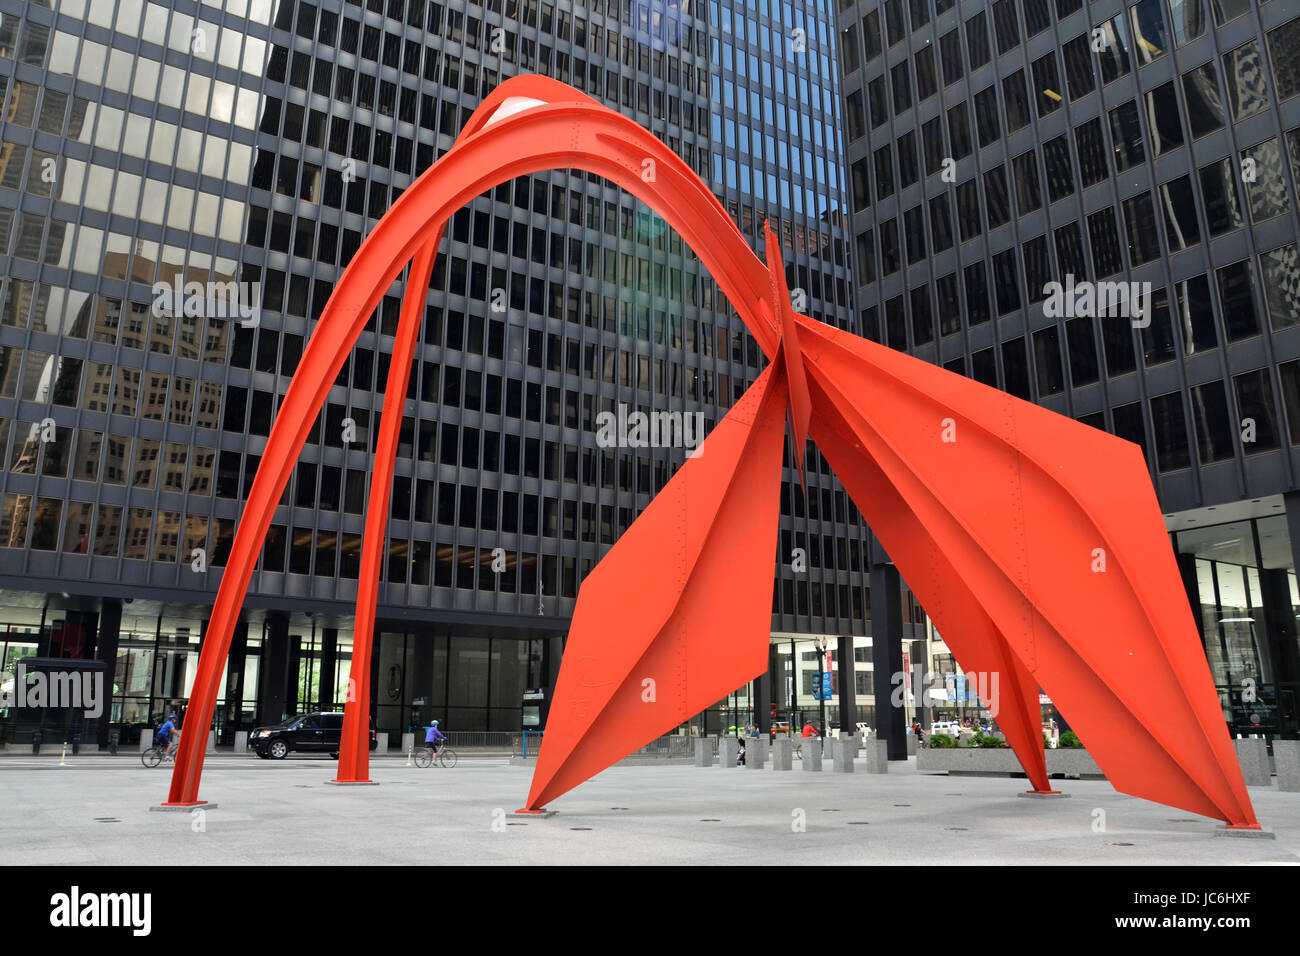 CHICAGO - MAY 29: Flamingo, in the Federal Plaza in Chicago, is shown here on May 29, 2016. The stabile was constructed by American sculptor Alexander Stock Photo